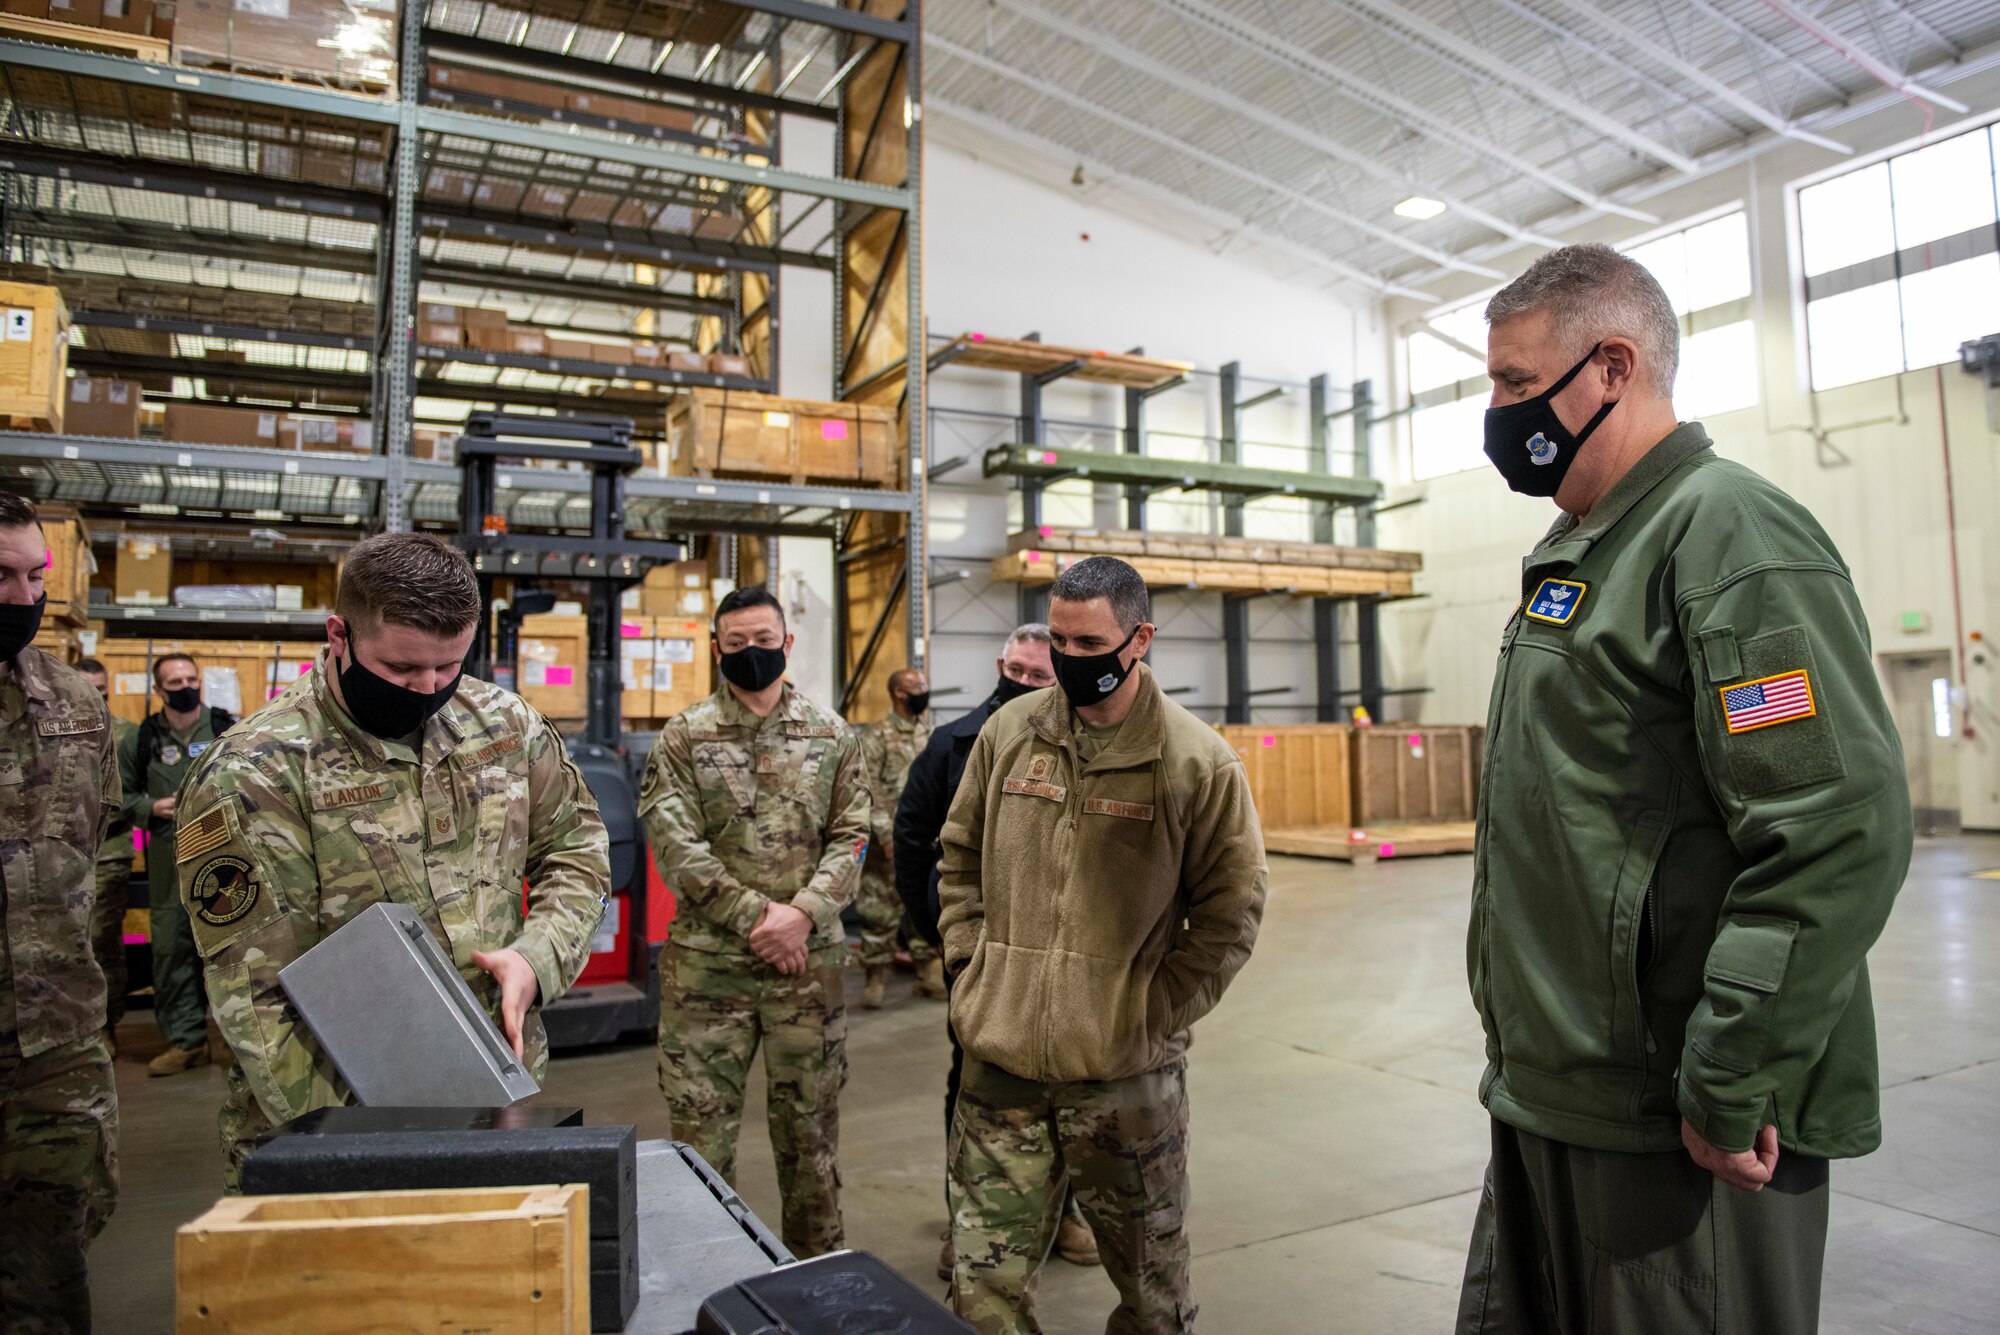 Tech. Sgt. Daniel Clanton (front left), 92nd Logistics Readiness Squadron non-commissioned officer-in-charge of Air Transportation Function, showcases an innovative tool to Gen. Mike Minihan, Air Mobility Command commander (right), and Chief Master Sgt. Brian Kruzelnick, AMC command chief (middle), during a base tour at Fairchild Air Force Base, Washington, Jan. 6, 2022. Clanton explained the safety benefits of the ‘DAWG Bone’ tool to the AMC Command Team. (U.S. Air Force photo by Amn Jenna A. Bond)